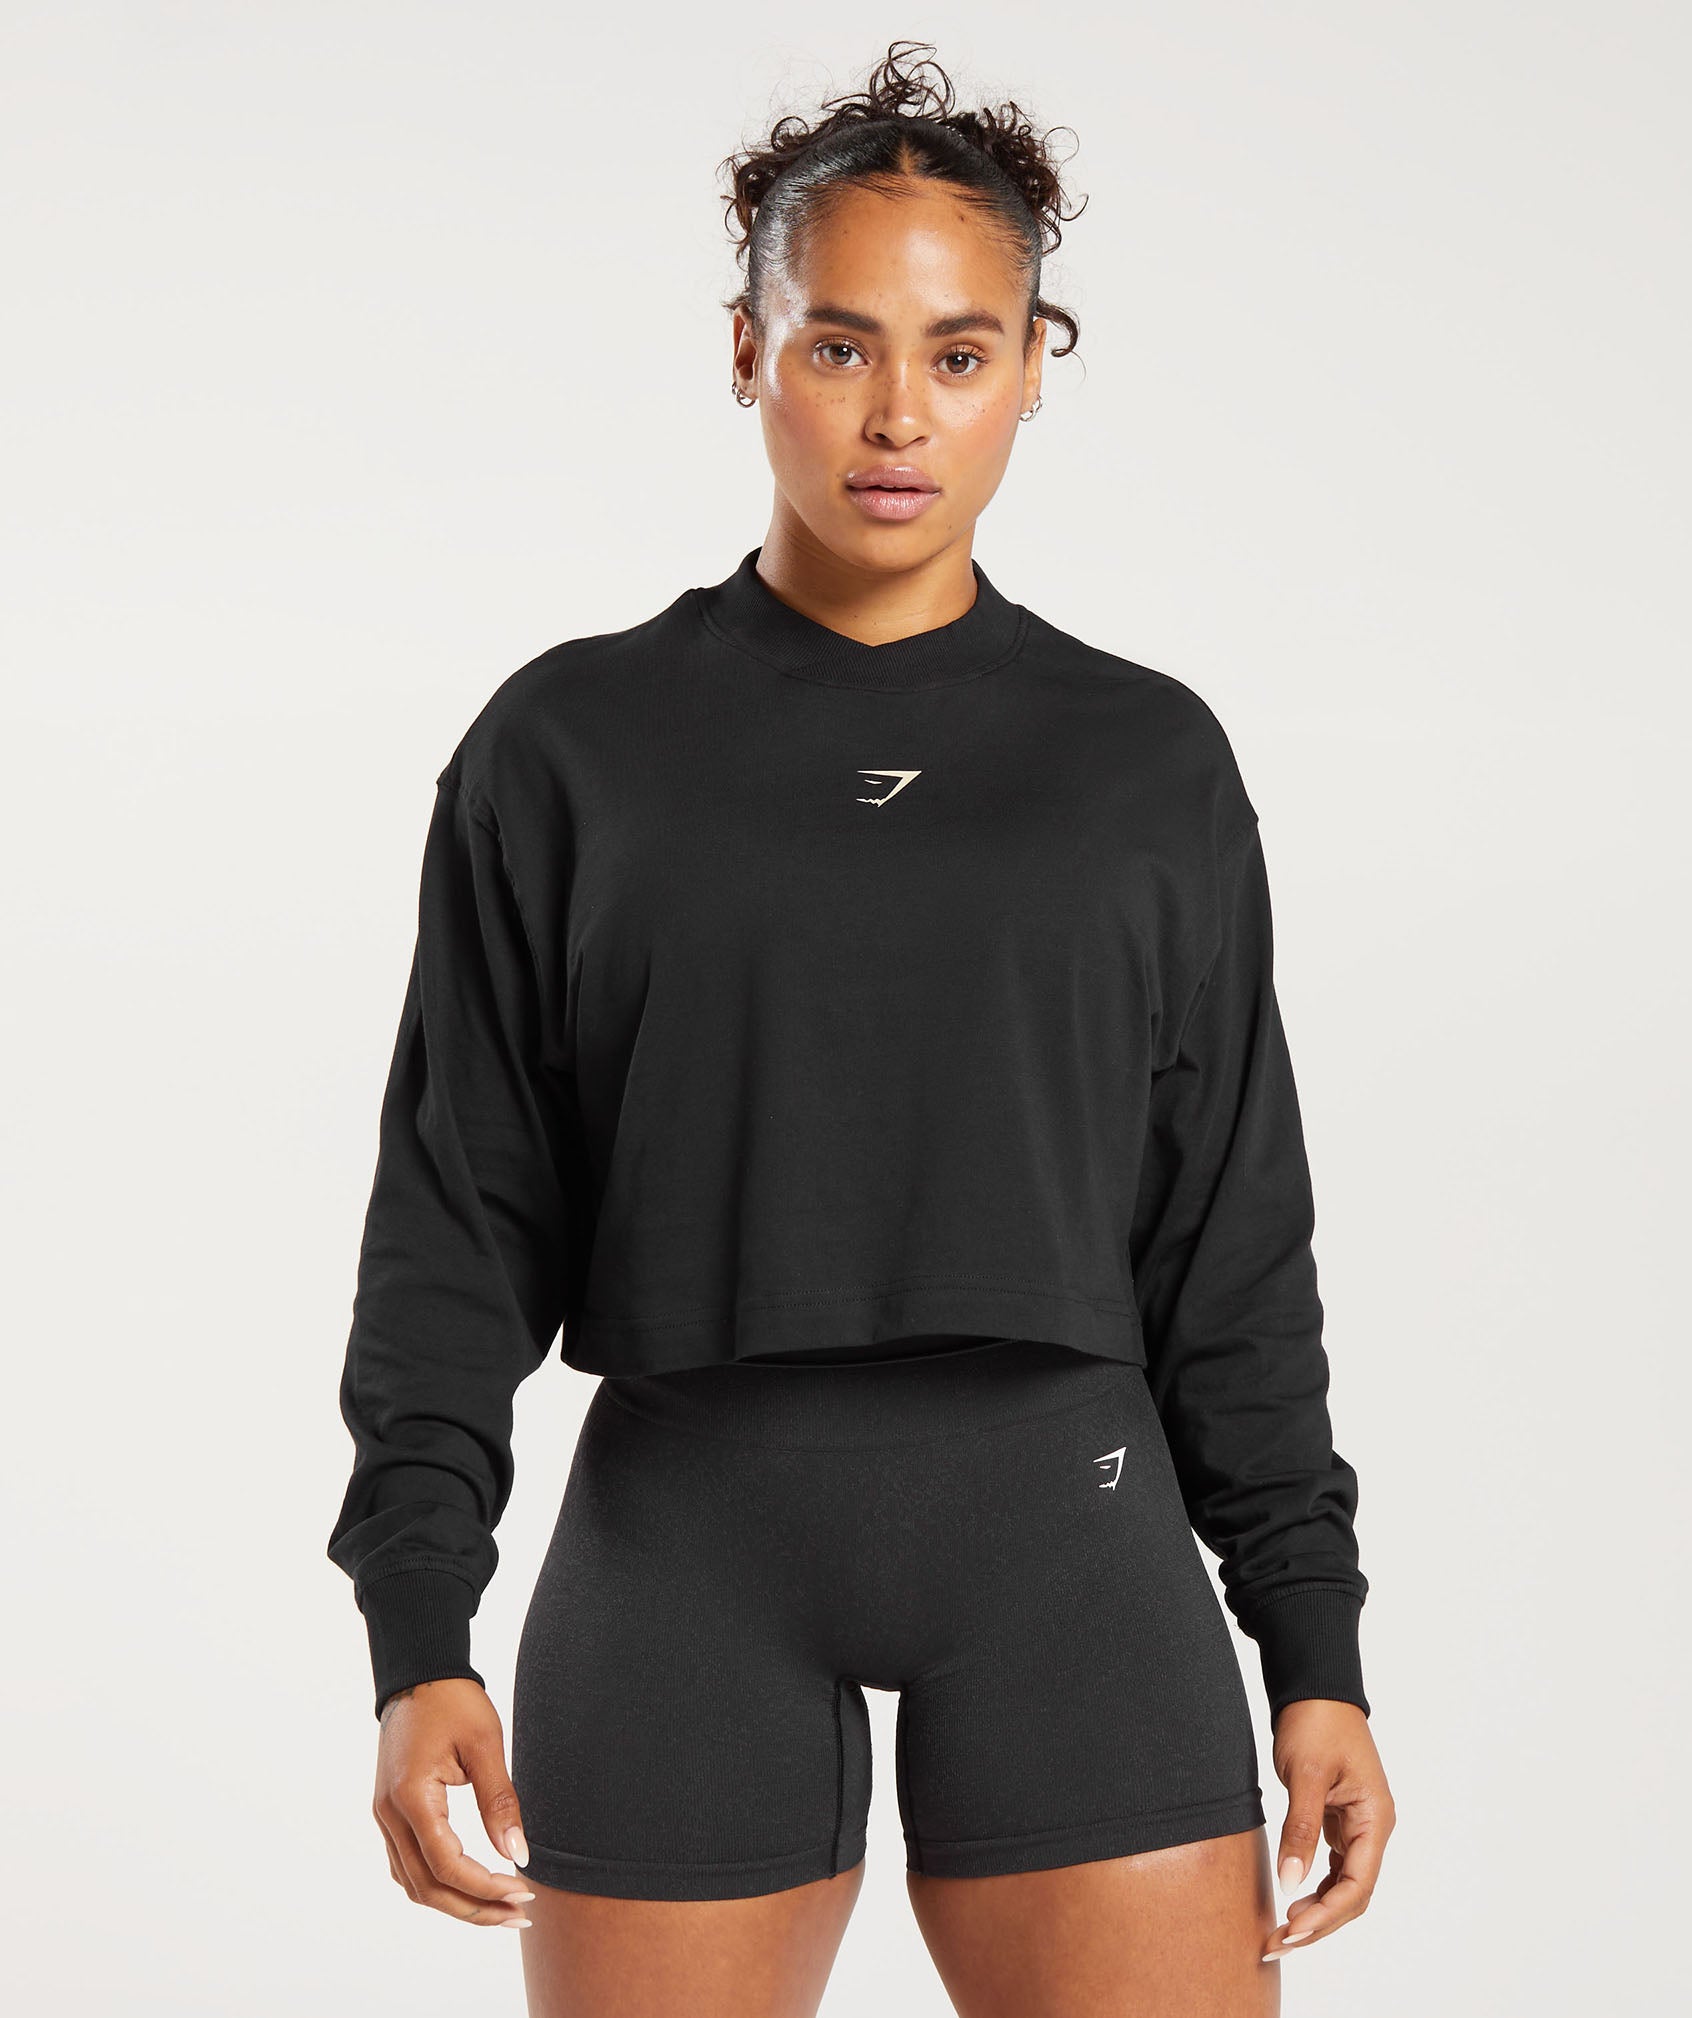 Committed To The Craft Long Sleeve Top in Black - view 2